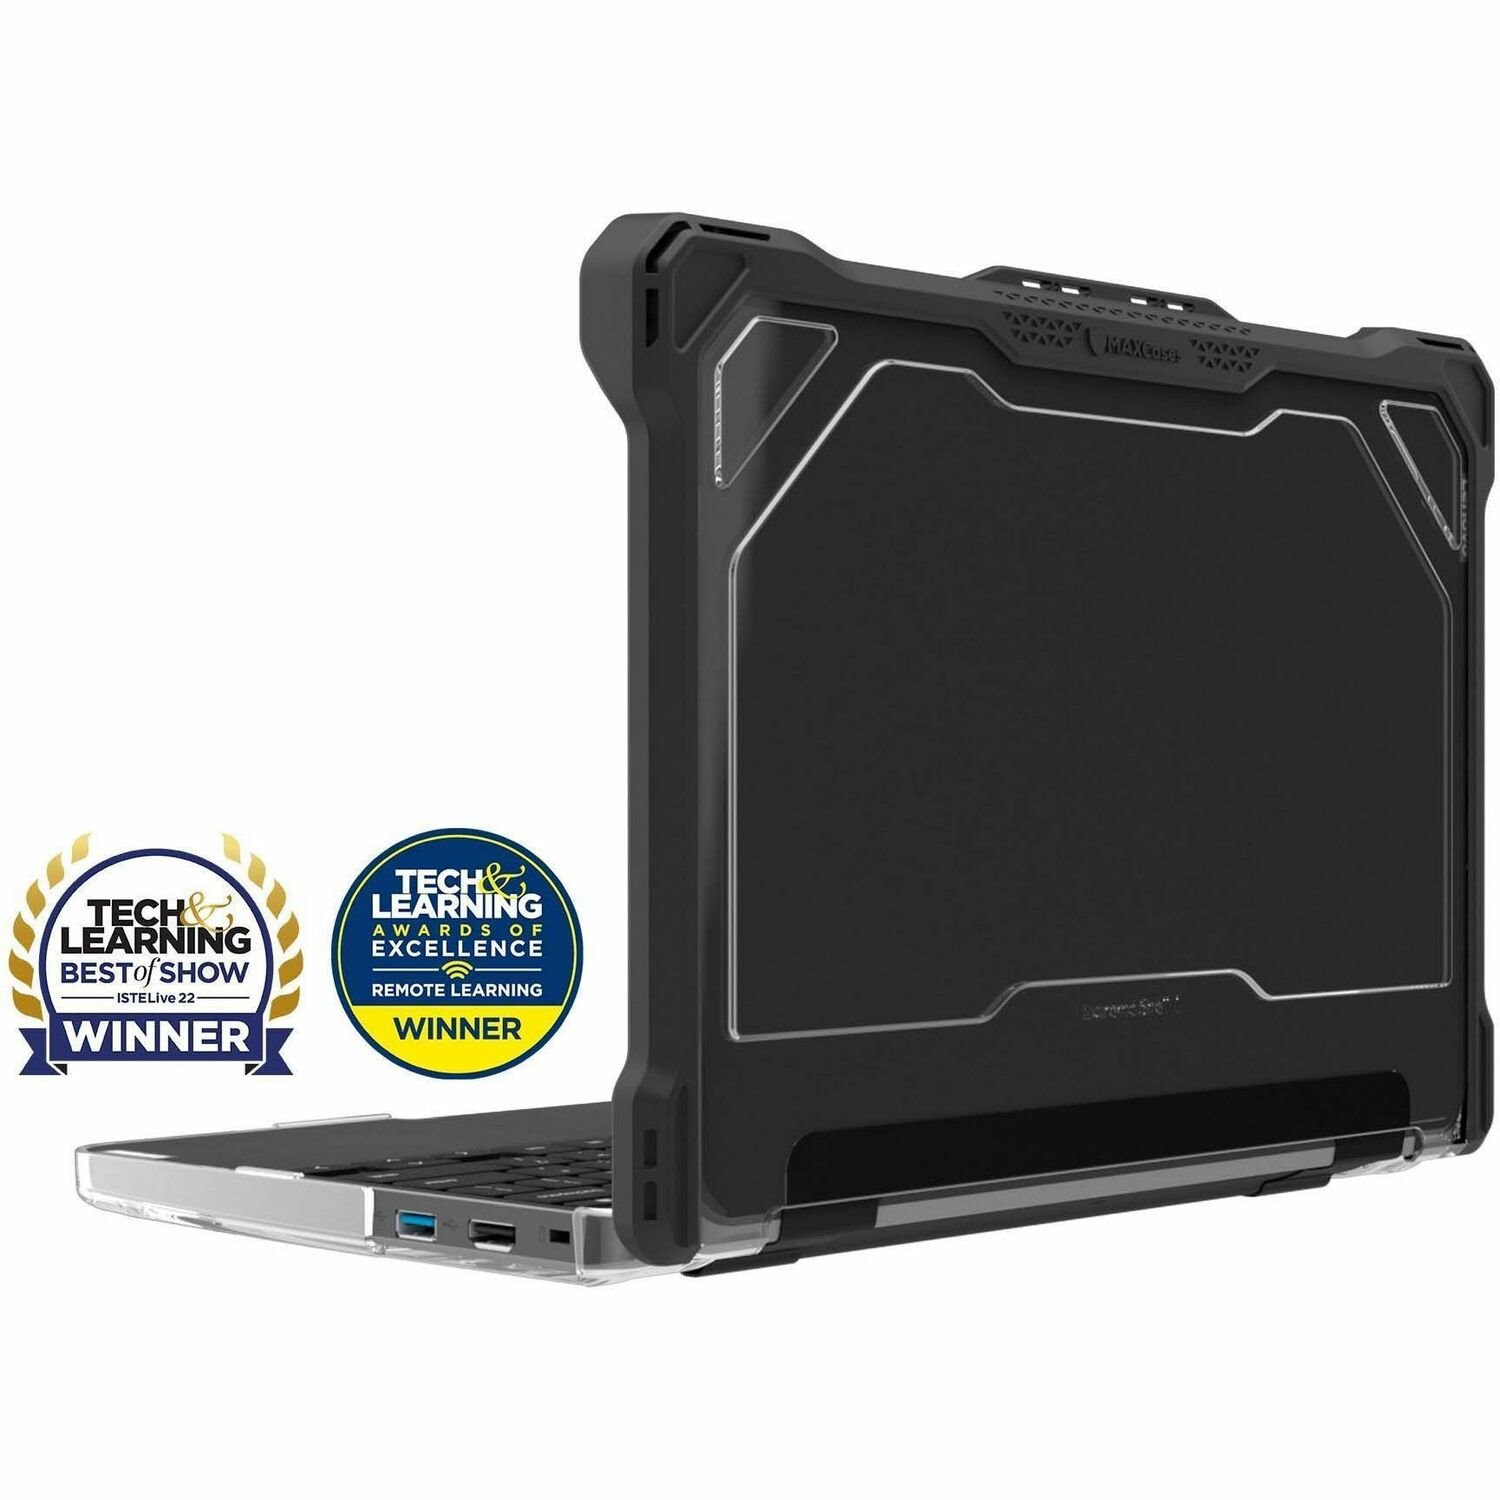 MAXCases Extreme Shell-L Rugged New Case for Asus Notebook - Black